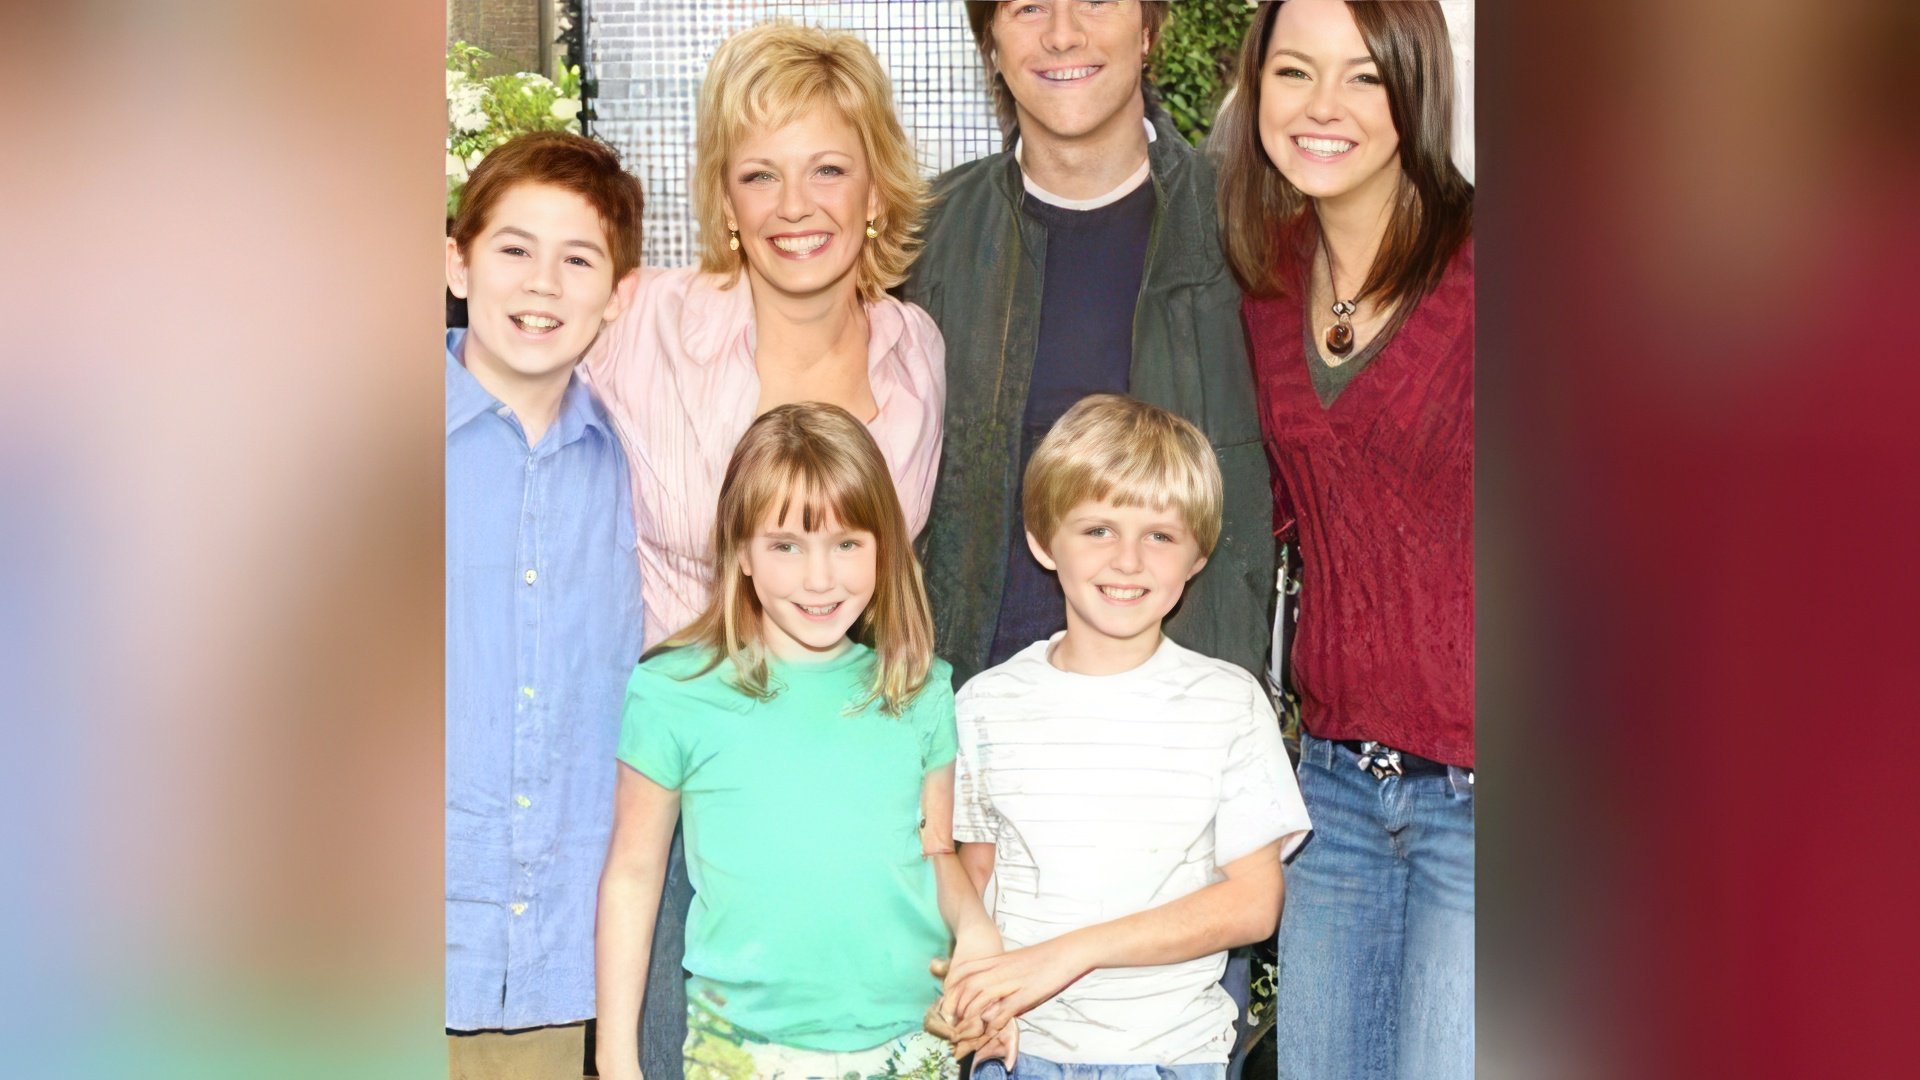 Emma Stone’s first role (“The New Partridge Family”)